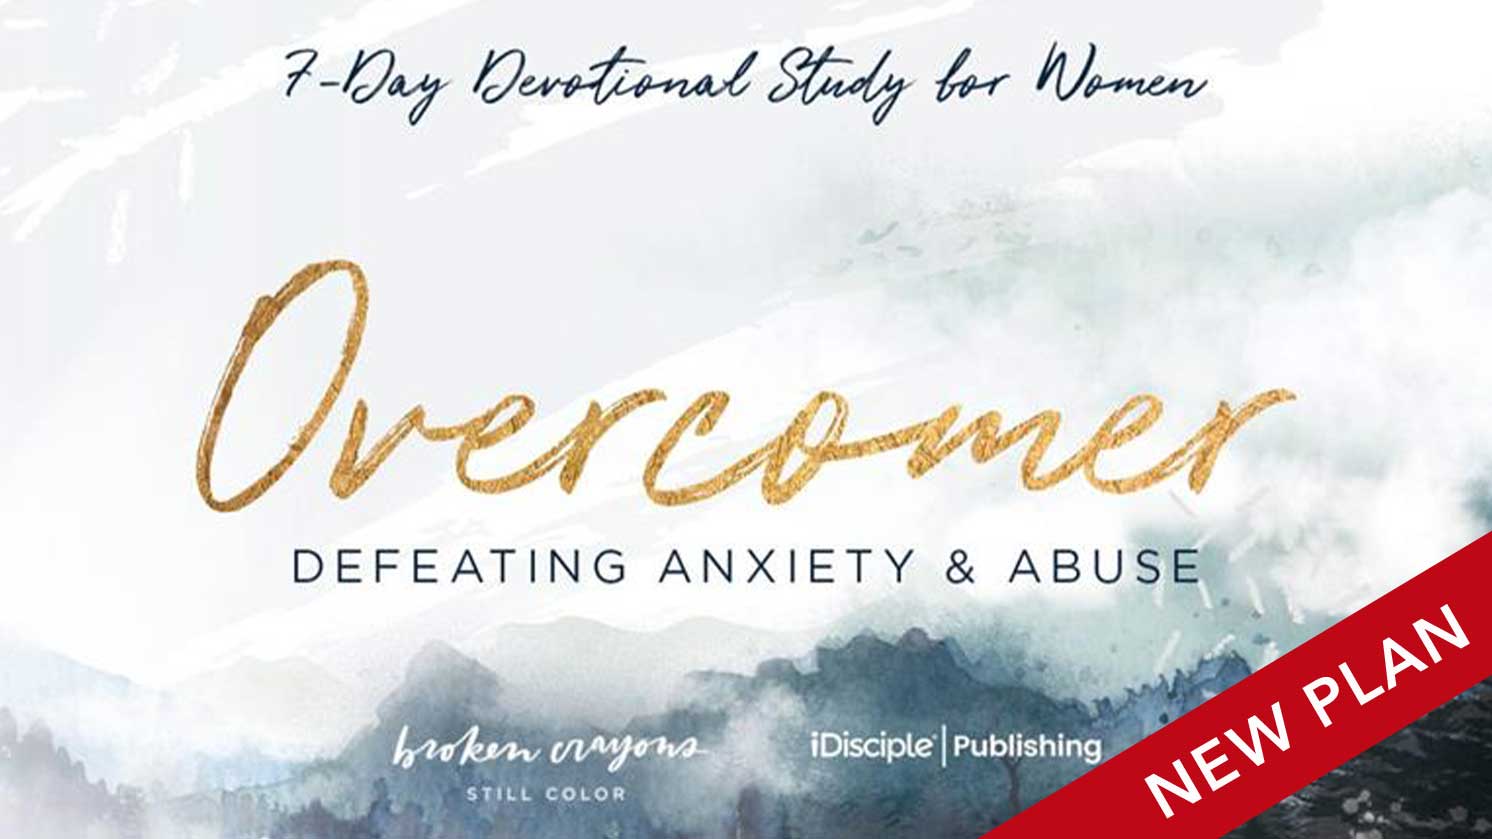 Overcomer: Defeating Anxiety & Abuse